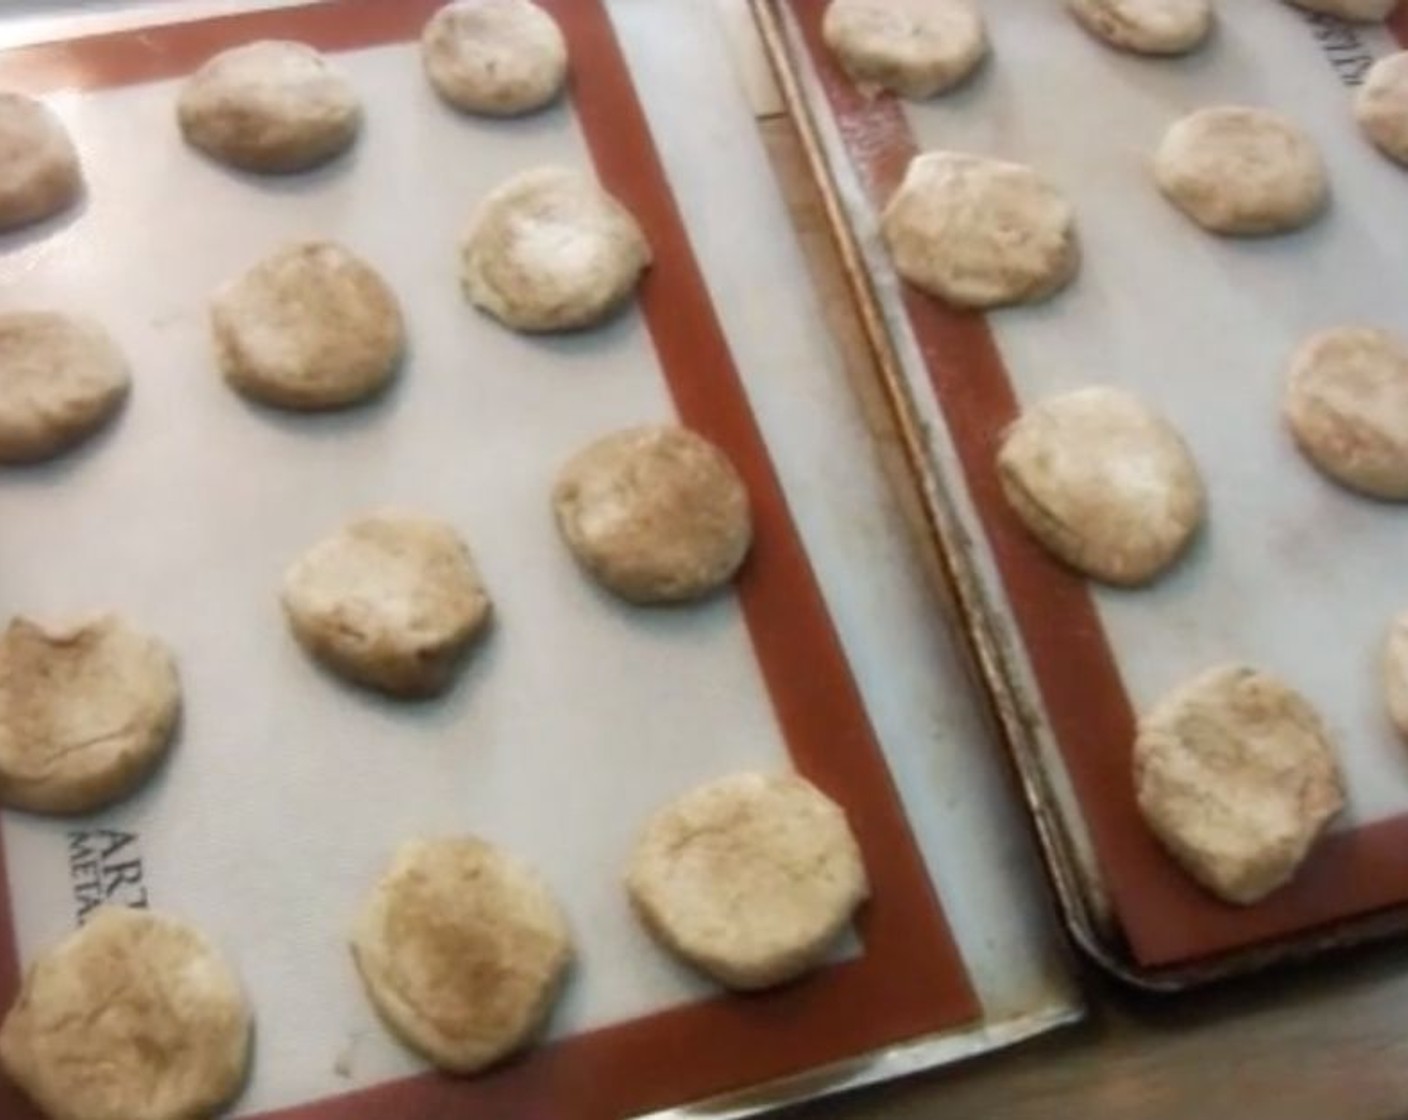 step 6 Shape the dough into balls and roll them in Cinnamon Sugar (to taste) to coat. Transfer cookies to a baking sheet and press down to flatten them out slightly.